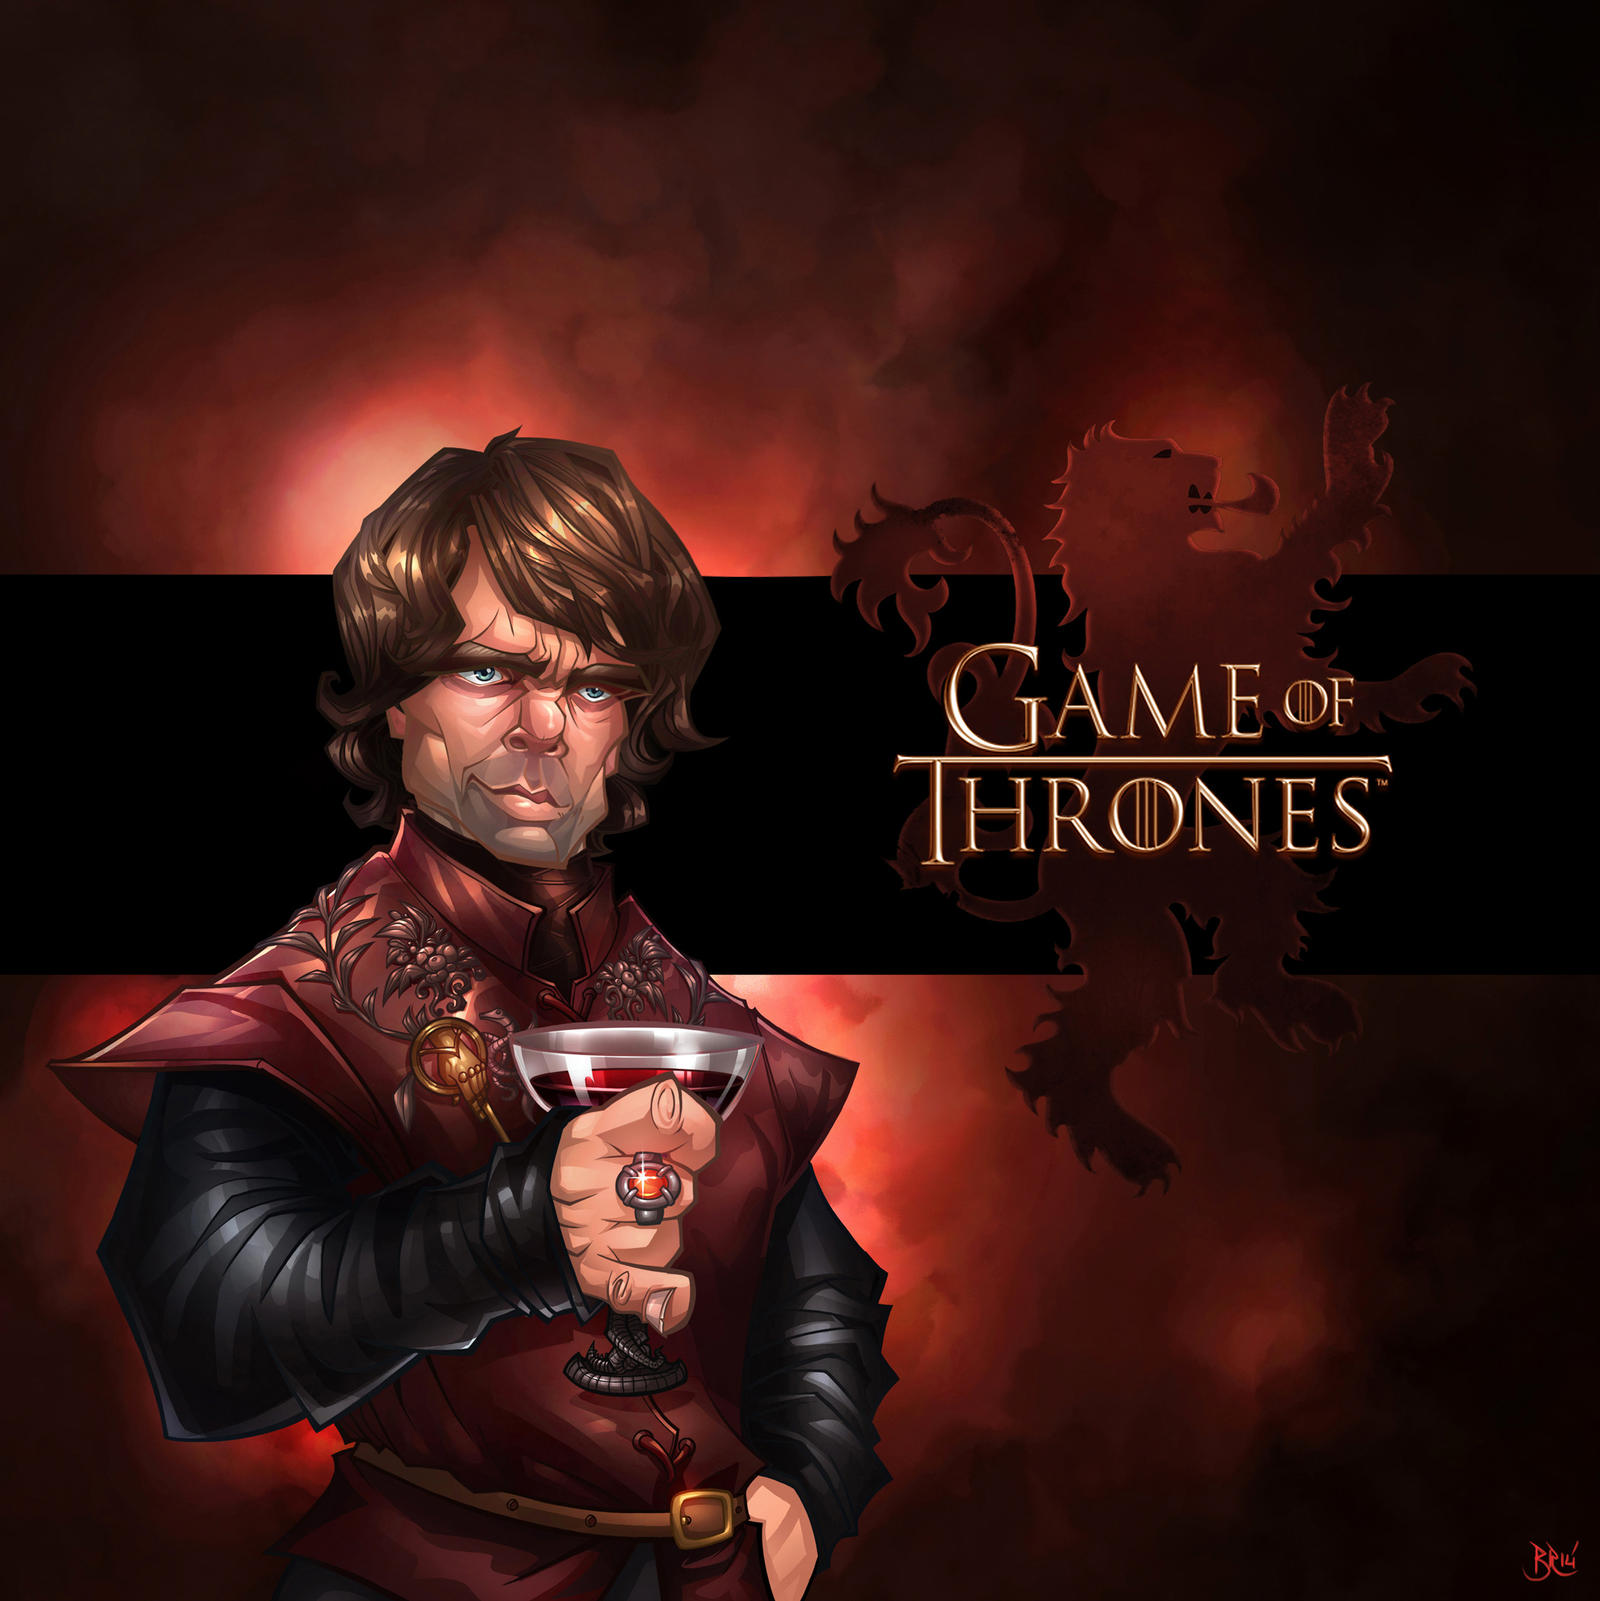 Game of Thrones Tyrion Lannister by BingRatnapala on